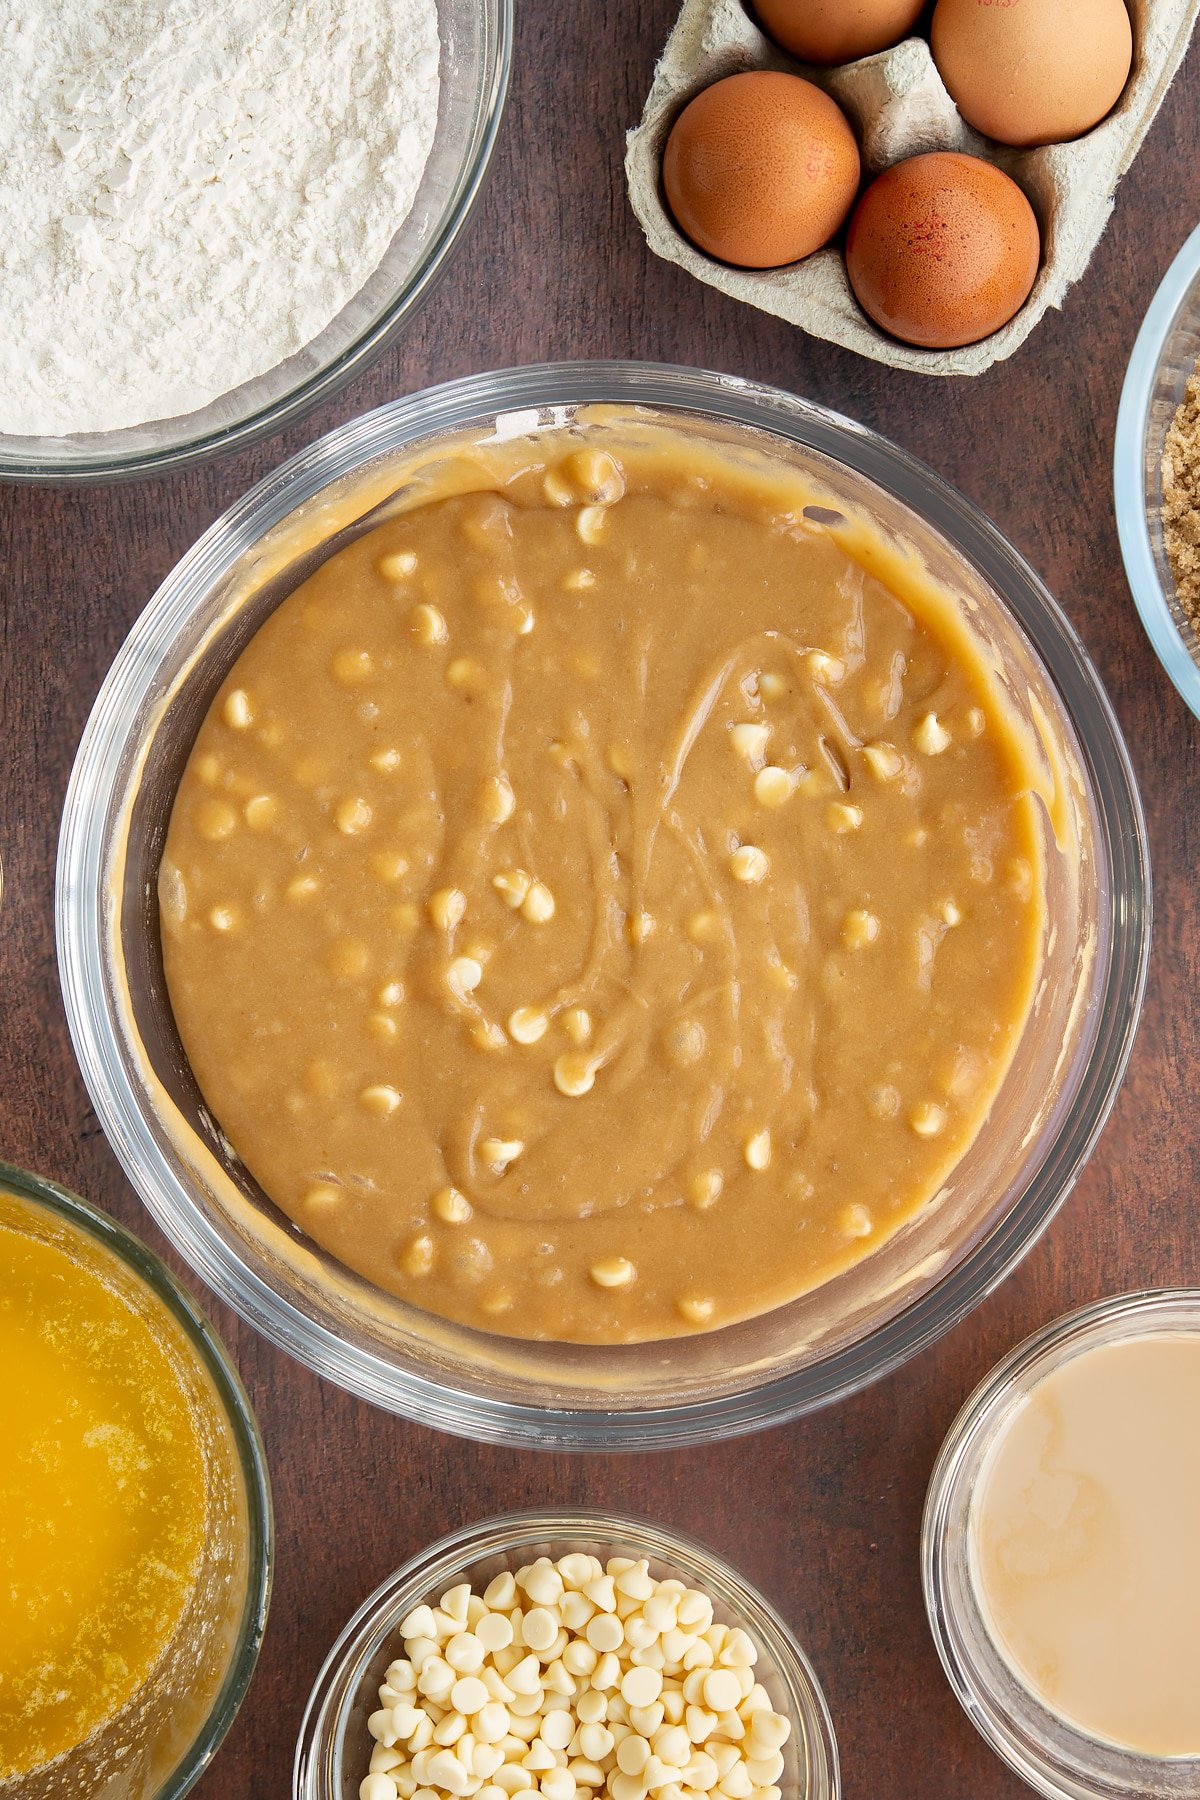 Baileys blondie batter with white chocolate chips in a glass mixing bowl. Ingredients to make Baileys blondies surround the bowl.